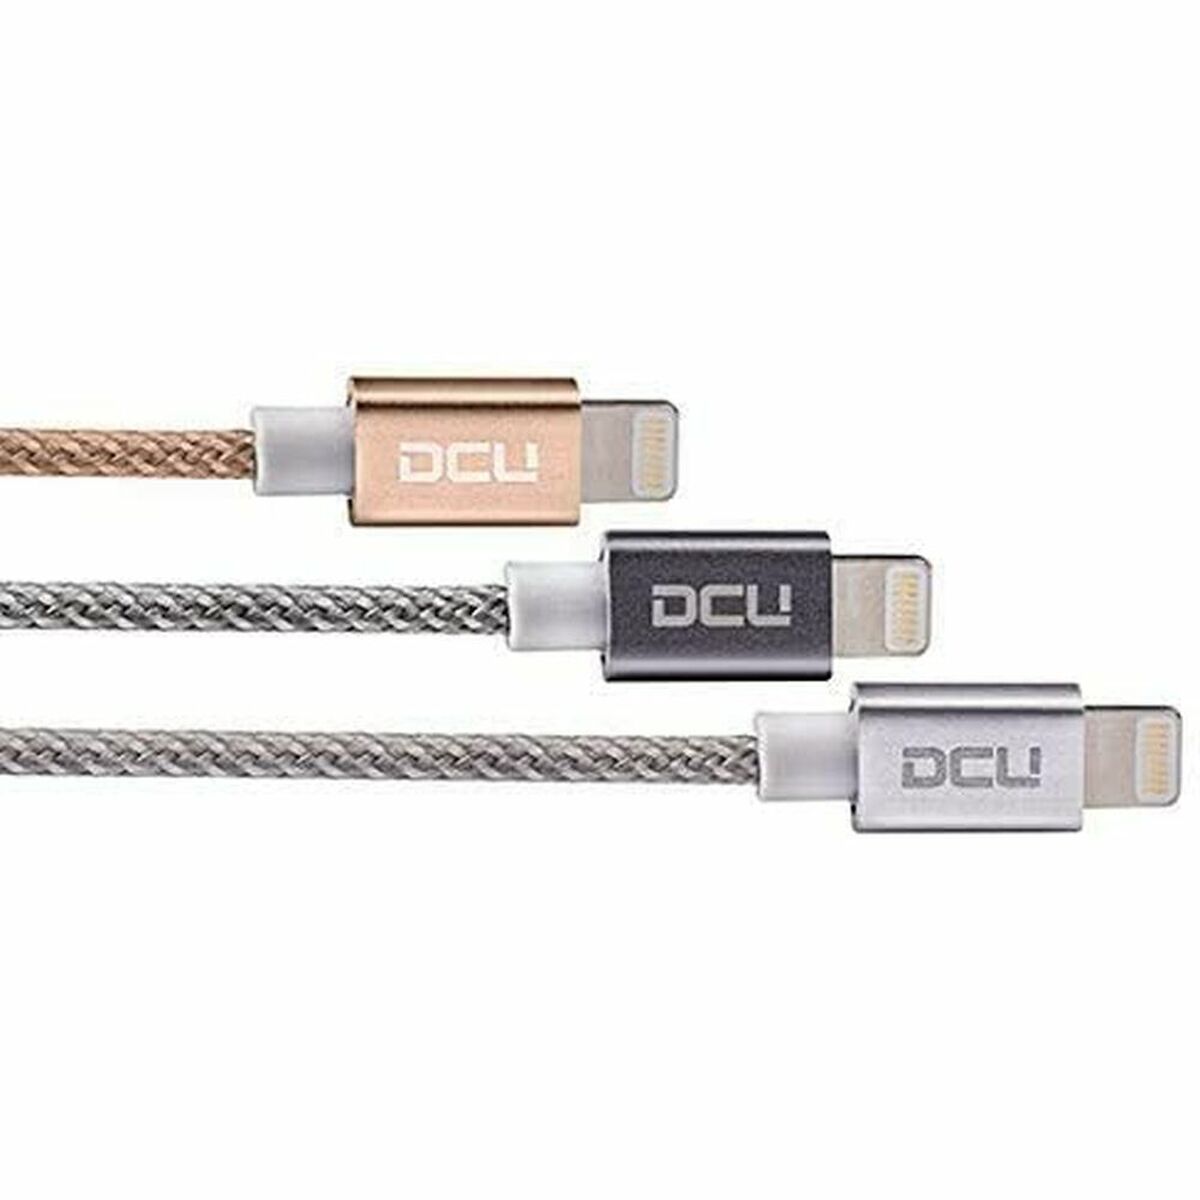 USB to Lightning Cable DCU 34101210 Pink 1 m